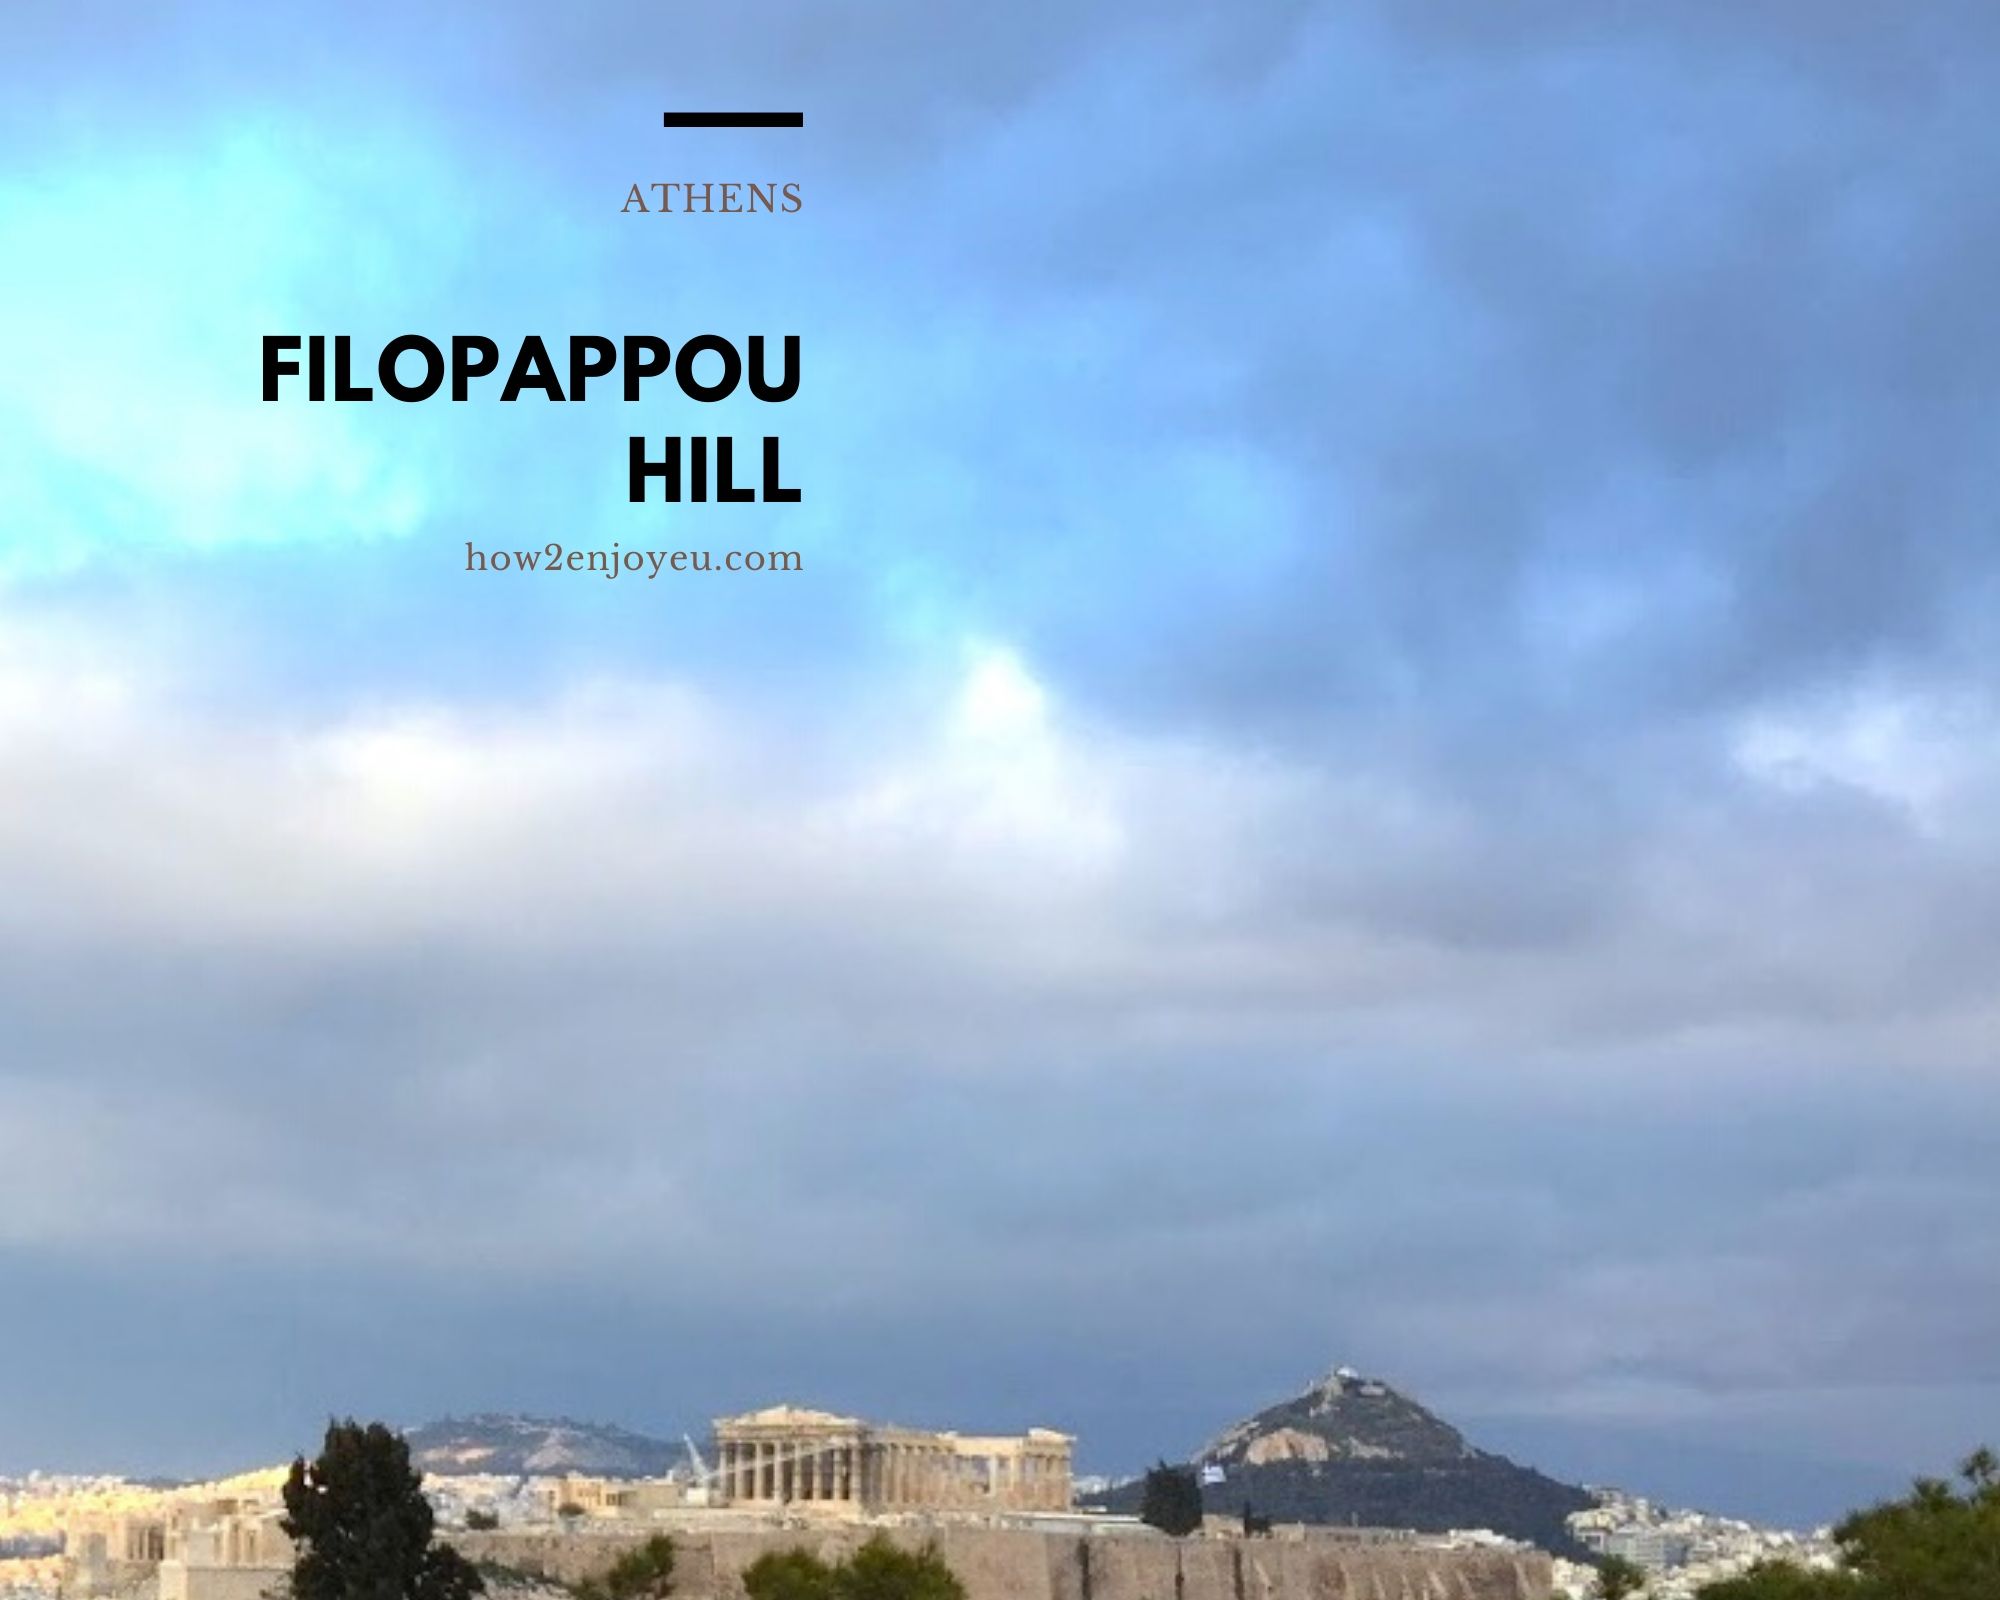 You are currently viewing アテネ、フィロパポスの丘でギリシャ神話みたいな写真が撮れた！【Filopappos Hill】